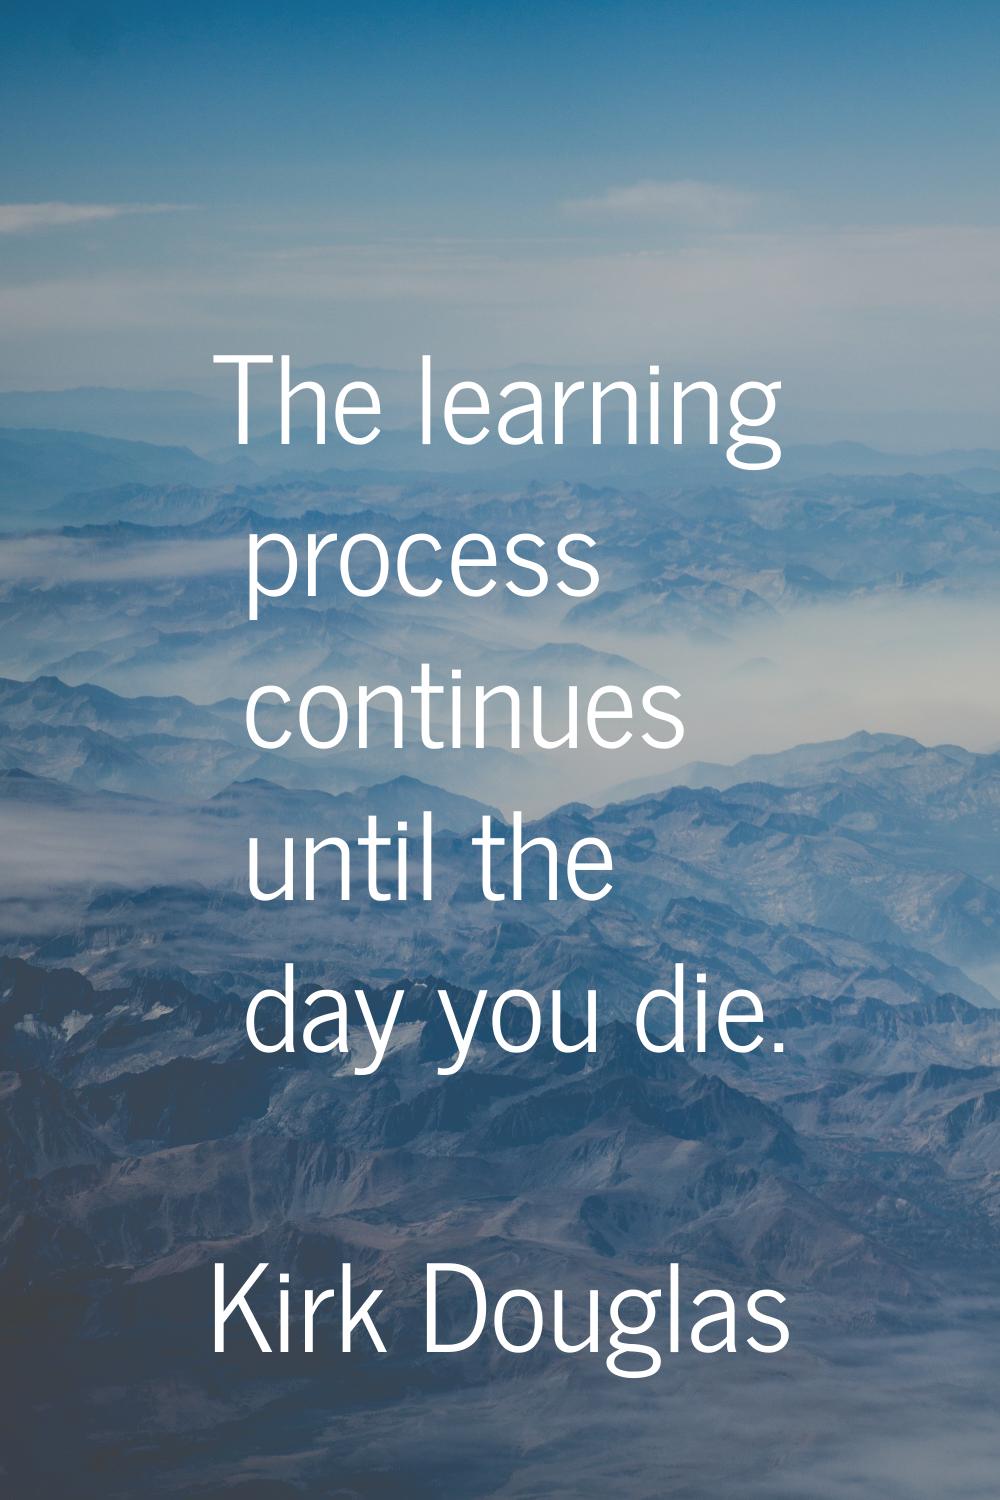 The learning process continues until the day you die.